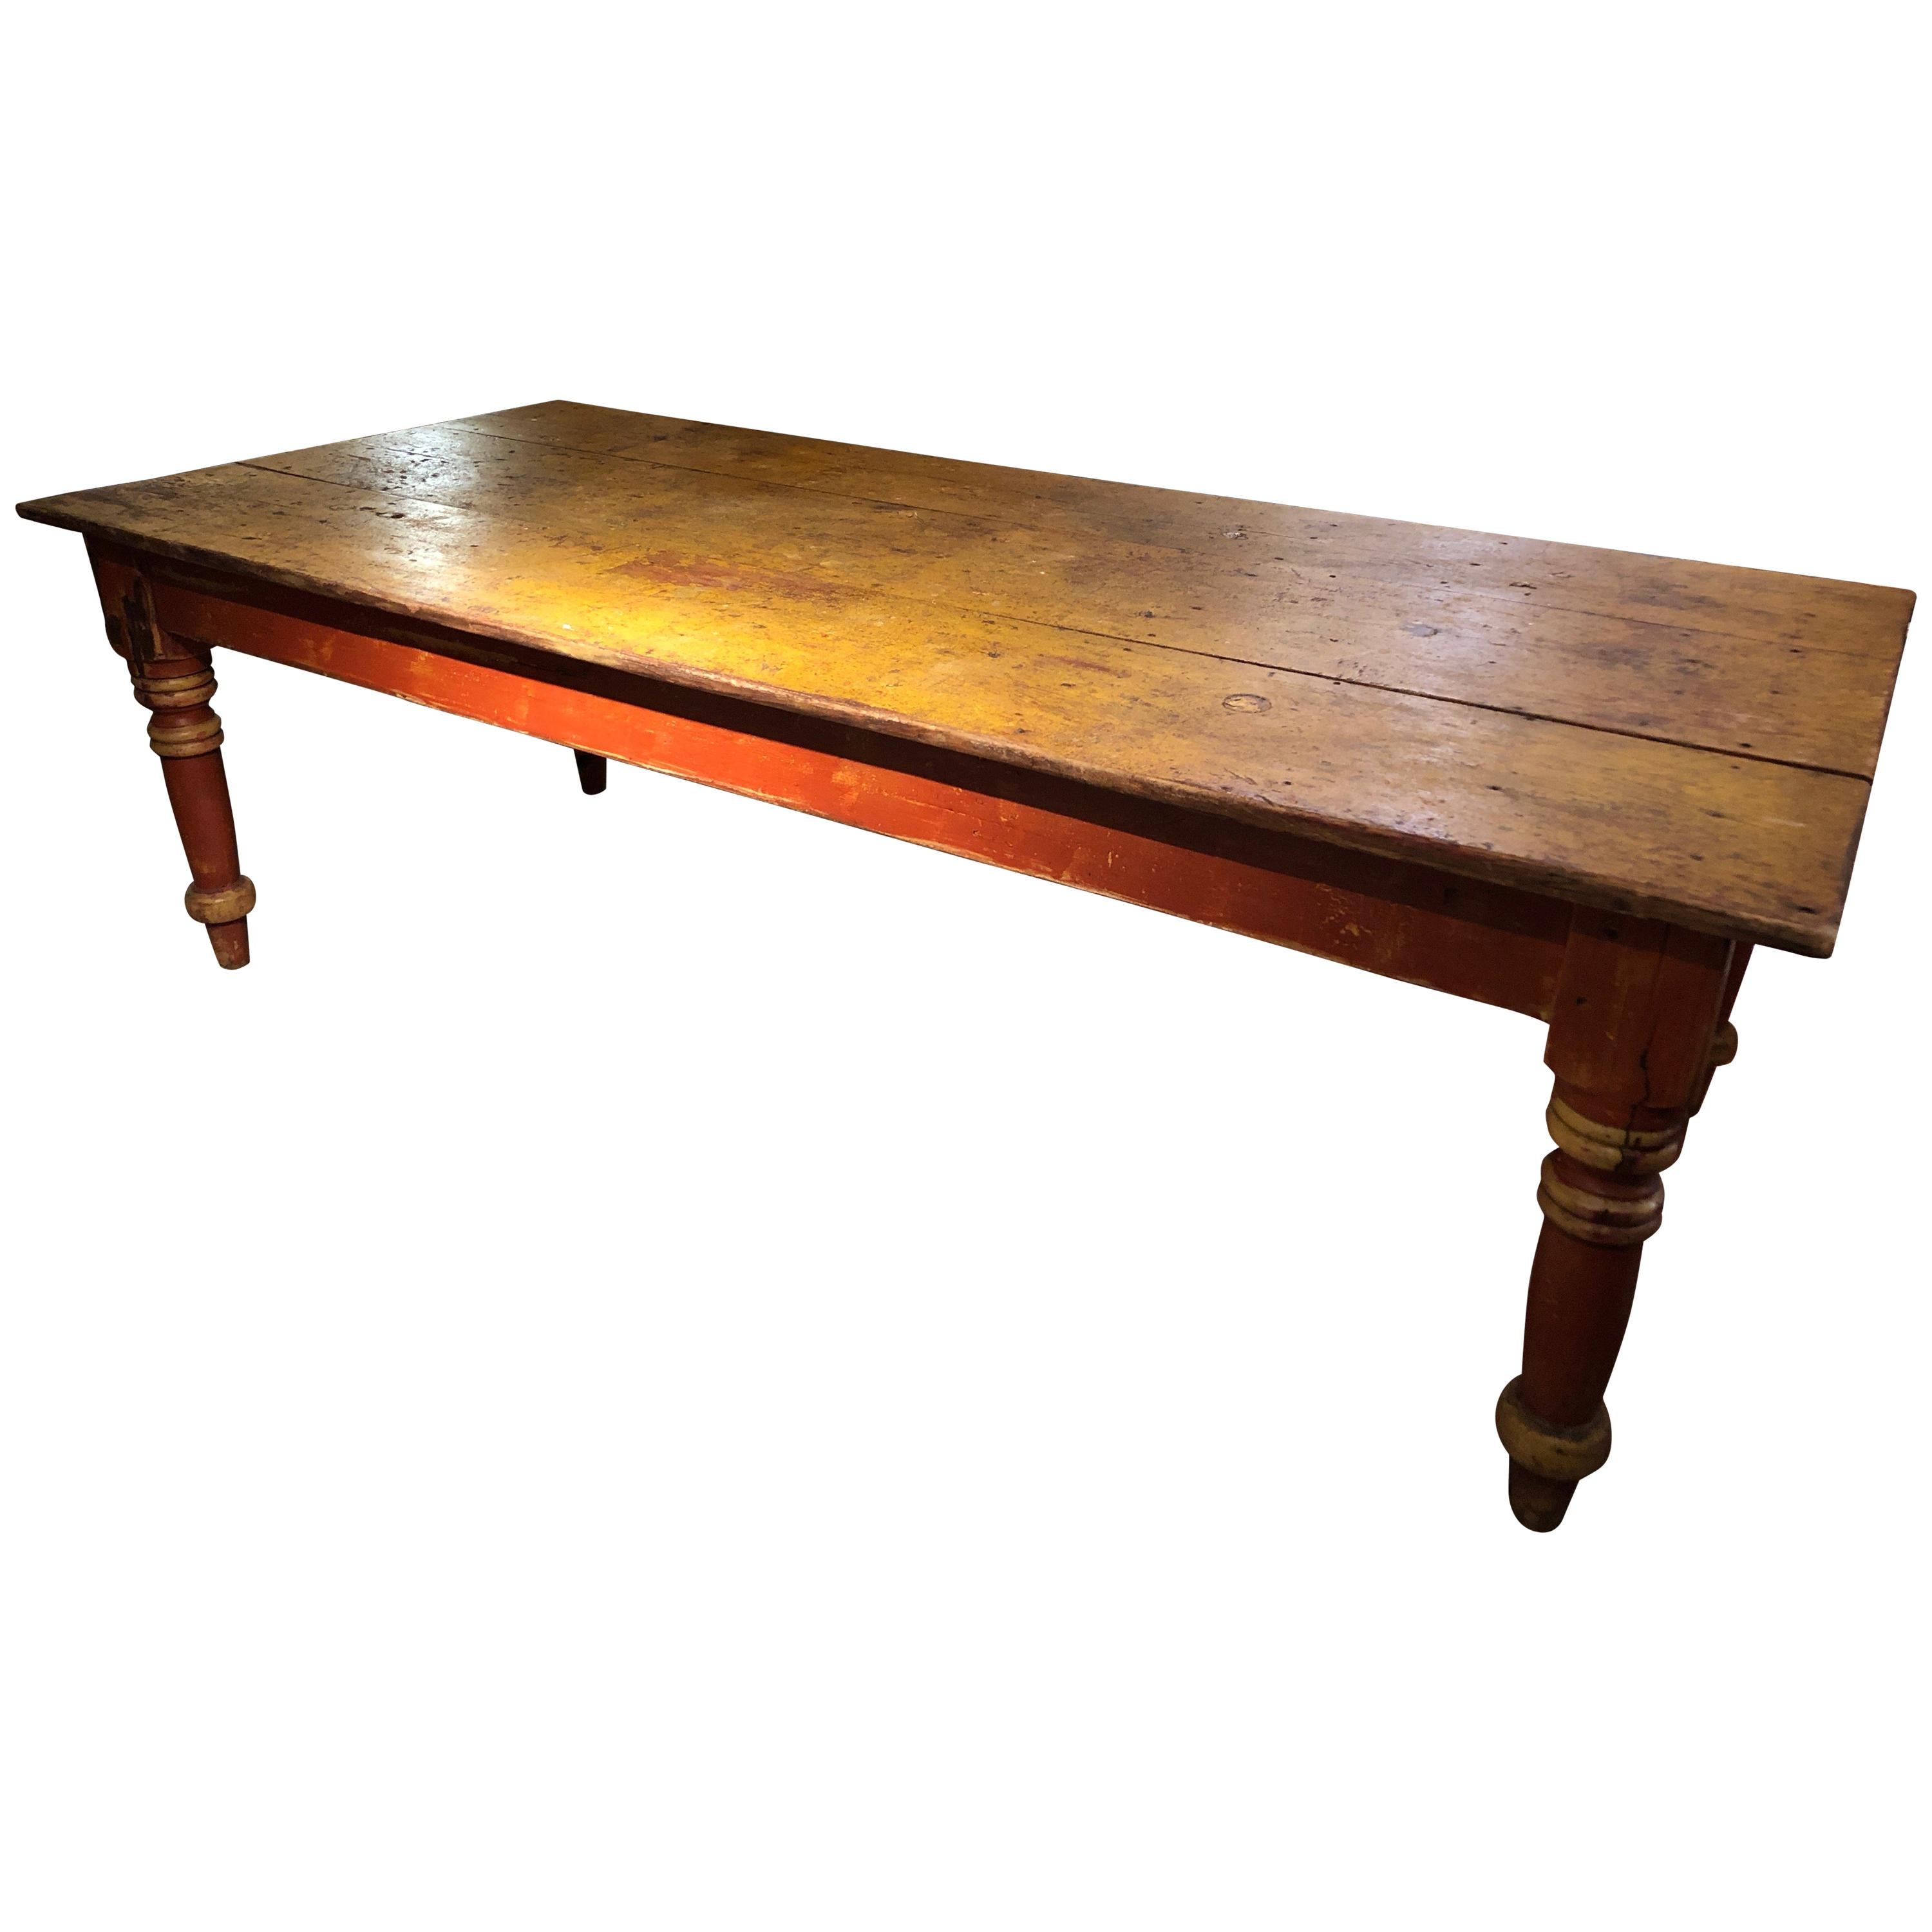 Wizened Very Large Antique Maine Farmhouse Dining Table with Original Paint